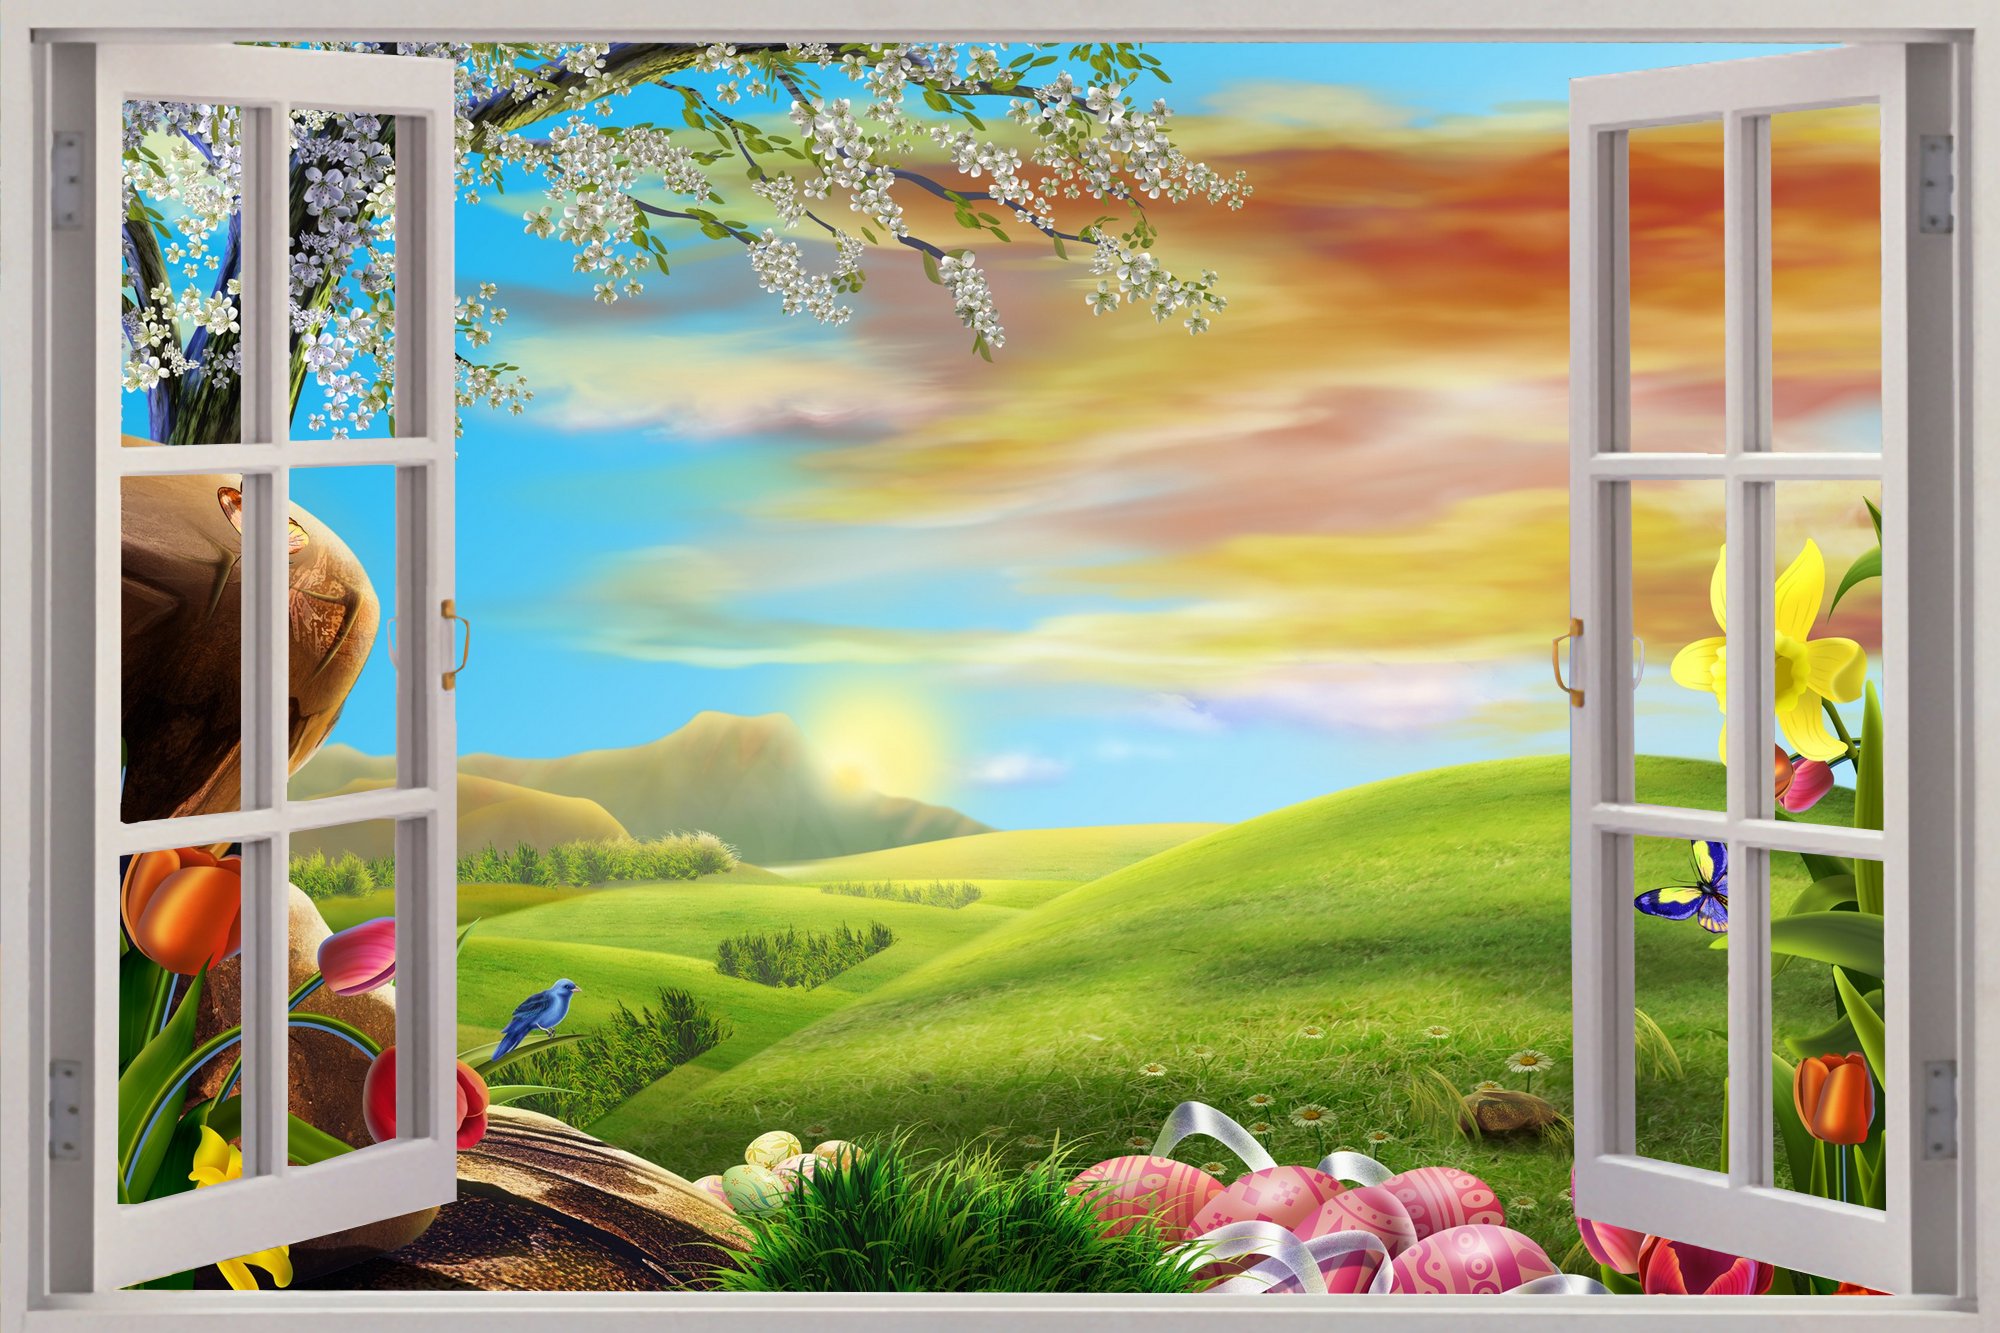 Details about Huge 3D Window Enchanted Meadow View Wall Stickers Mural 2000x1333